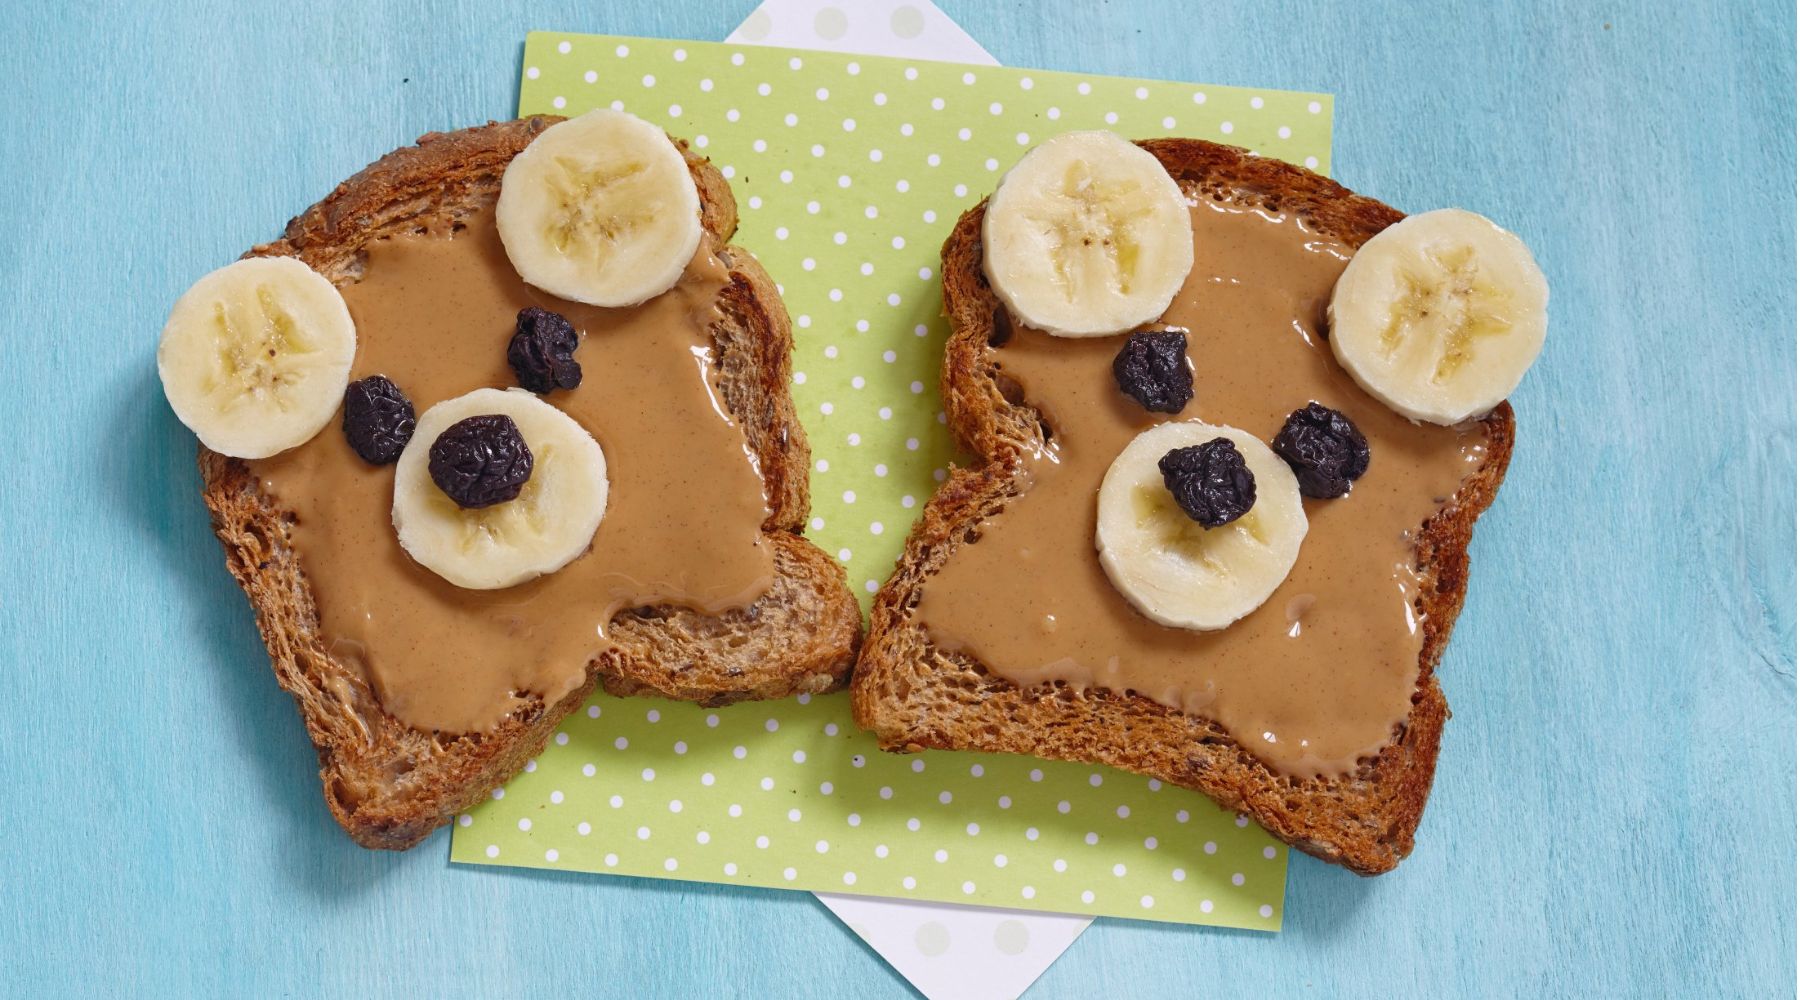 Tasty, Healthy Bedtime Snacks for Toddlers